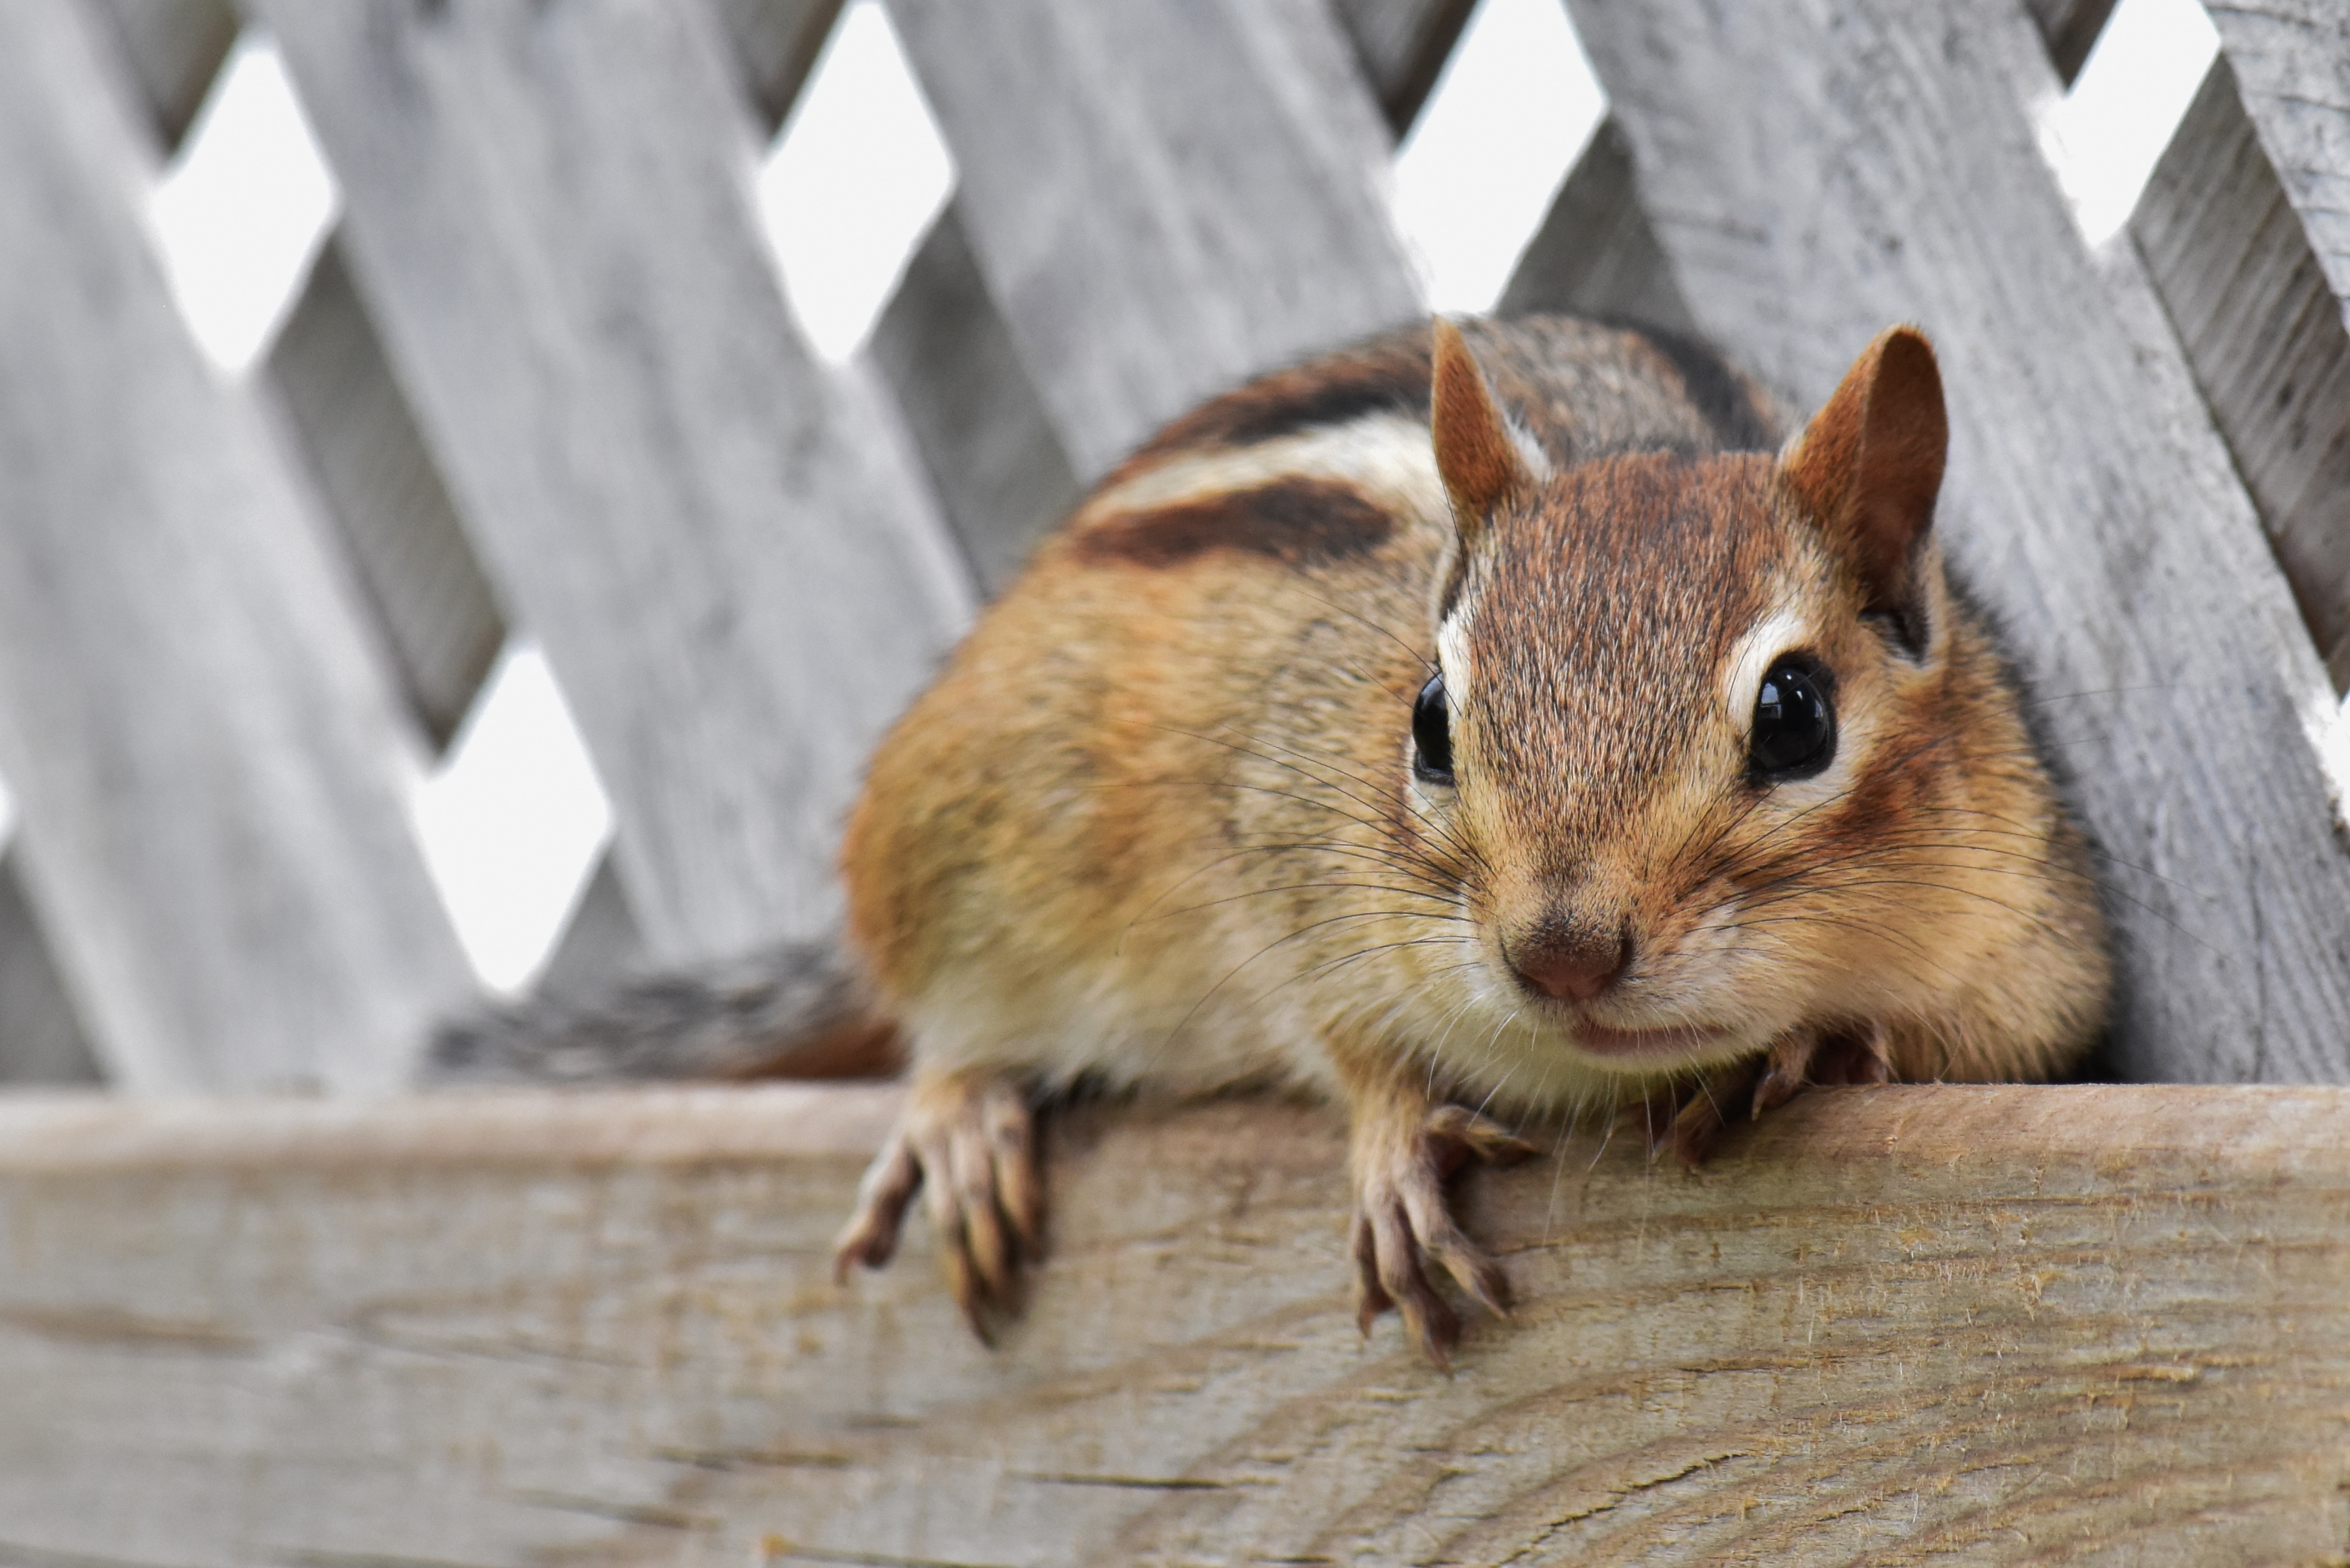 How to Get Rid of Chipmunks Using Traps or Repellants